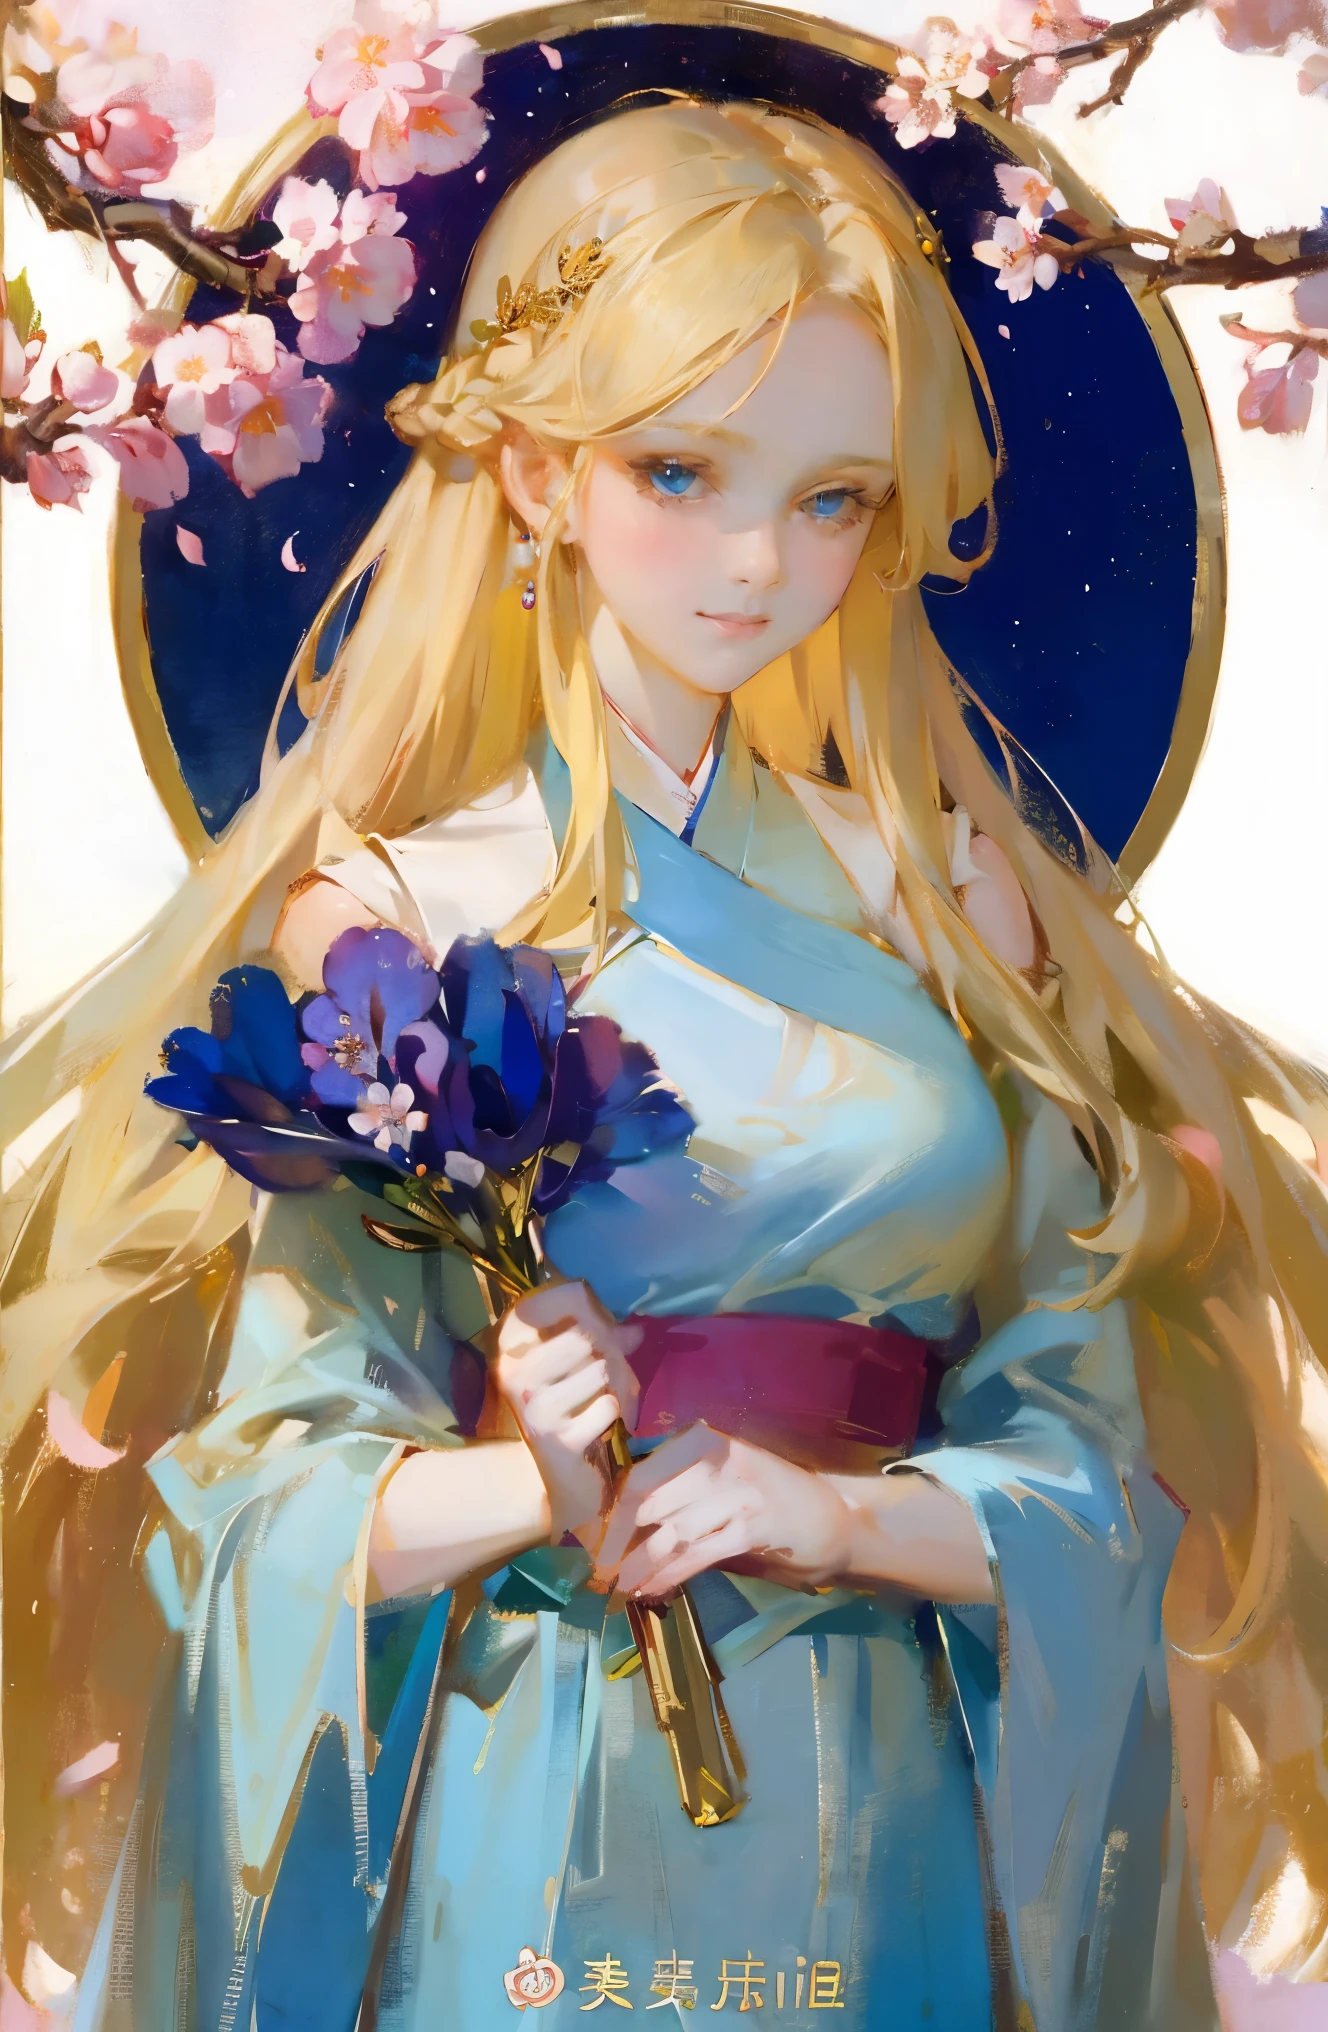 fantasy, portrait, Asia, European appearance, beautiful girl, delicate face, long pale blonde hair, blue eyes, in a beautiful hanfu, emphasizing the figure in light colors, expressive breasts, cherry blossoms in the background, hd